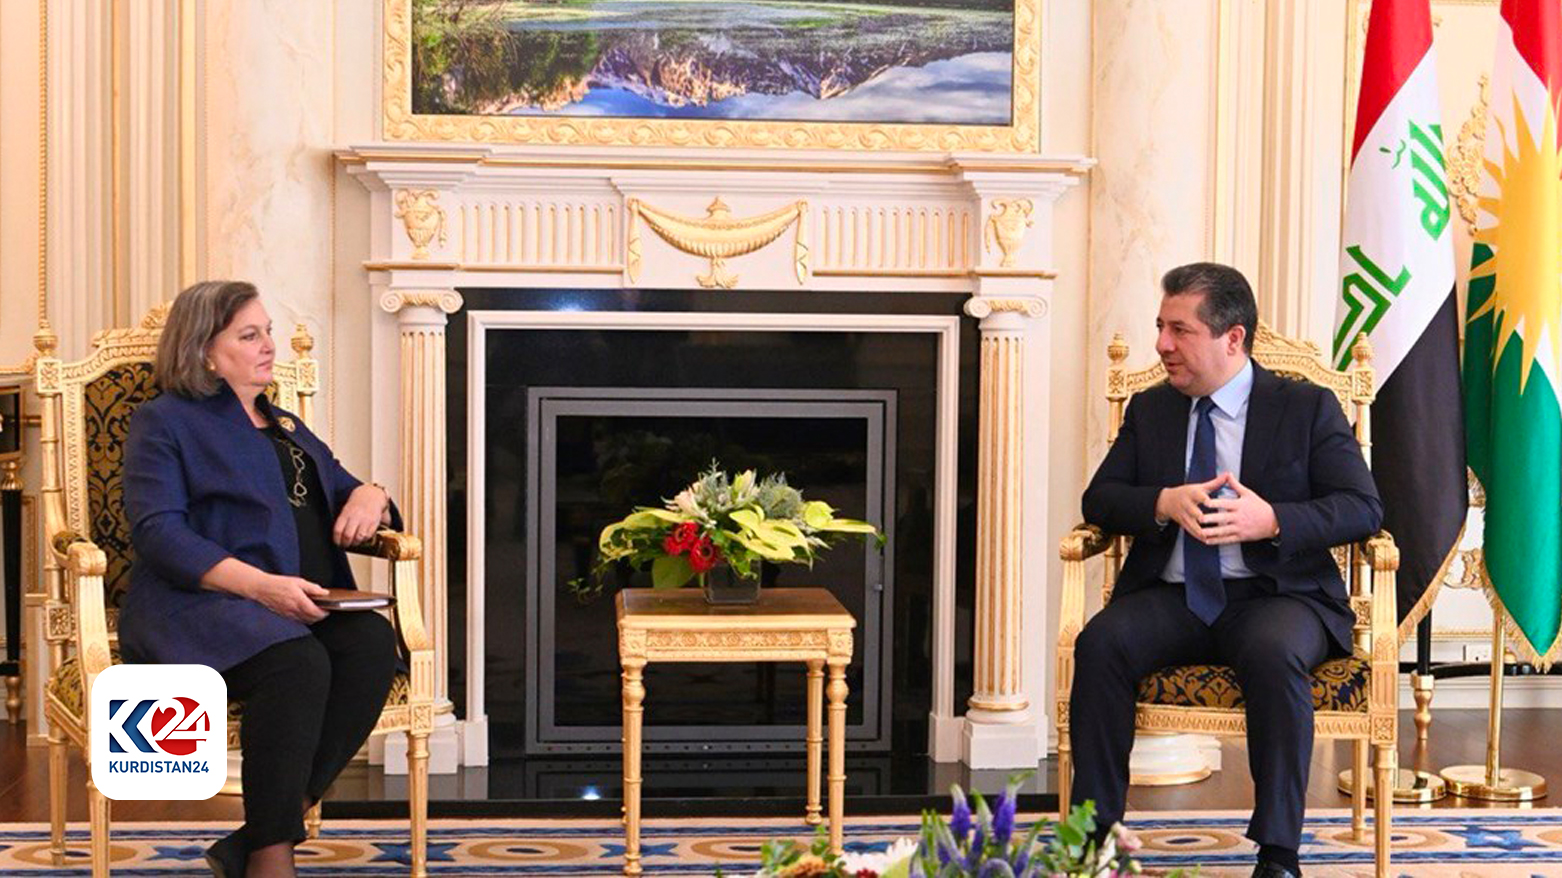 Kurdistan Region Prime Minister Masrour Barzani (right) during his meeting with Victoria Nuland, the Under Secretary of State for Political Affairs of the United States in Erbil, Dec. 20, 2023. (Photo: KRG)